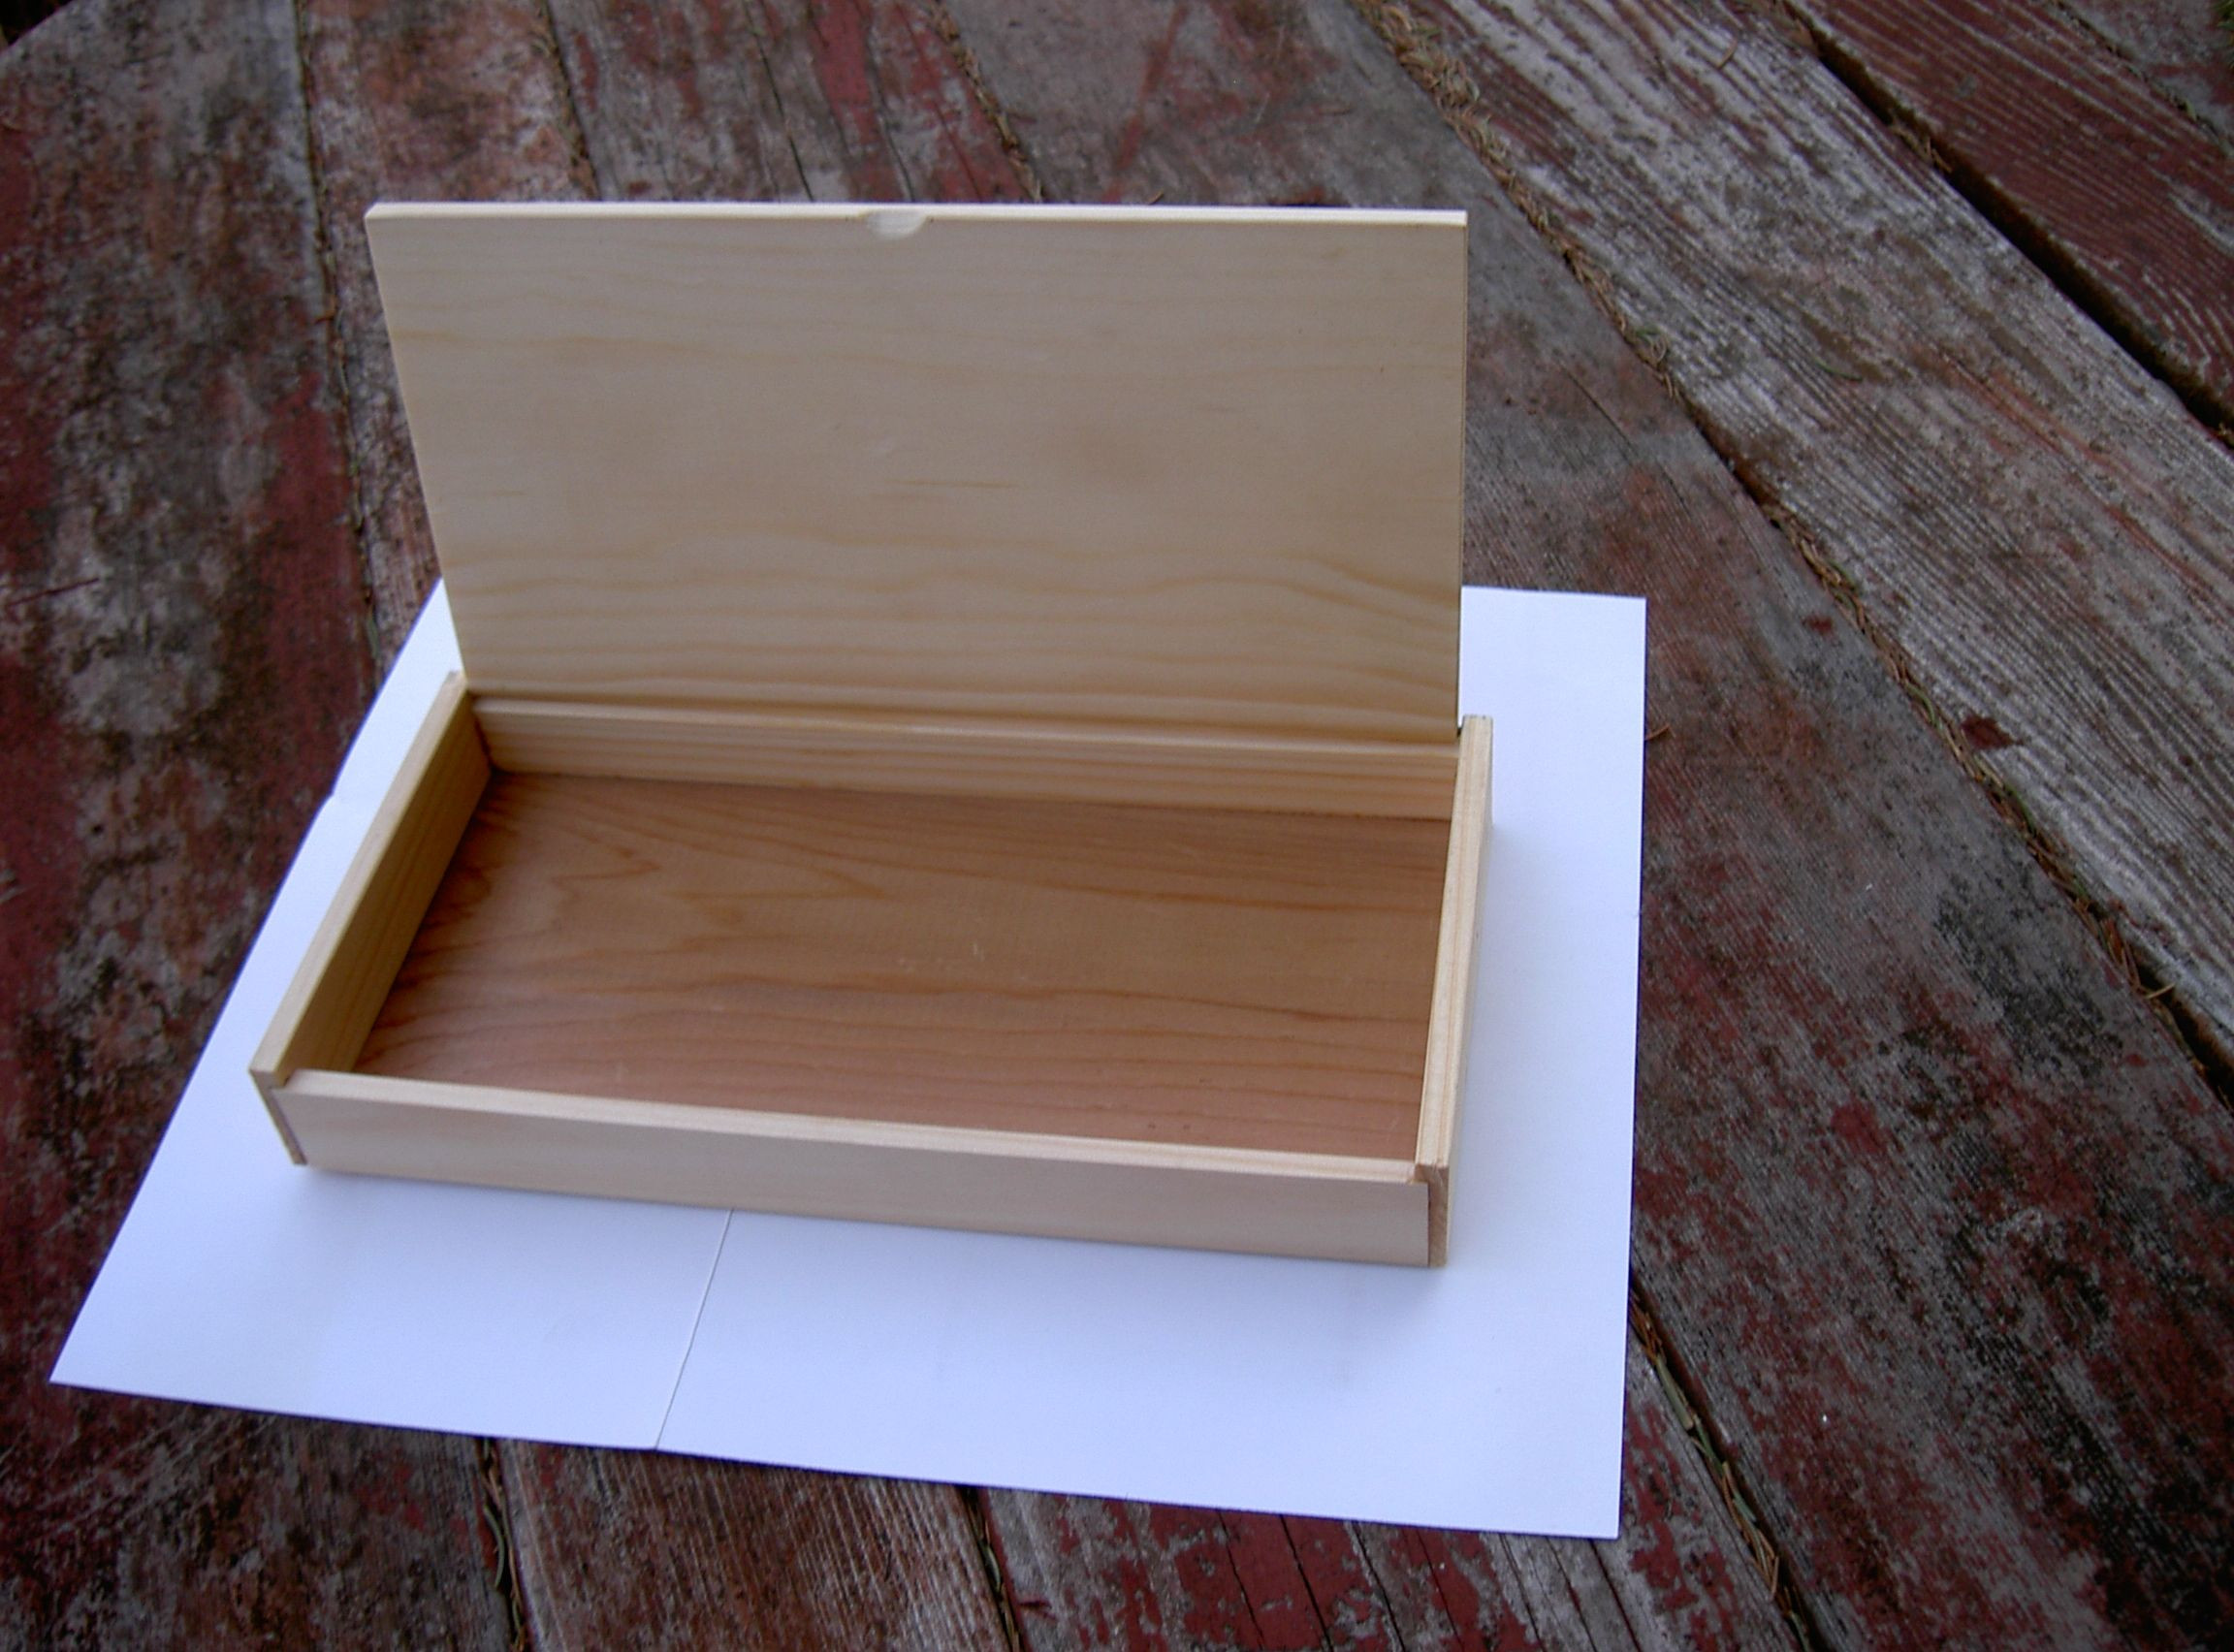 DIY Wooden Box With Hinged Lid
 Wooden Box with hinged lid